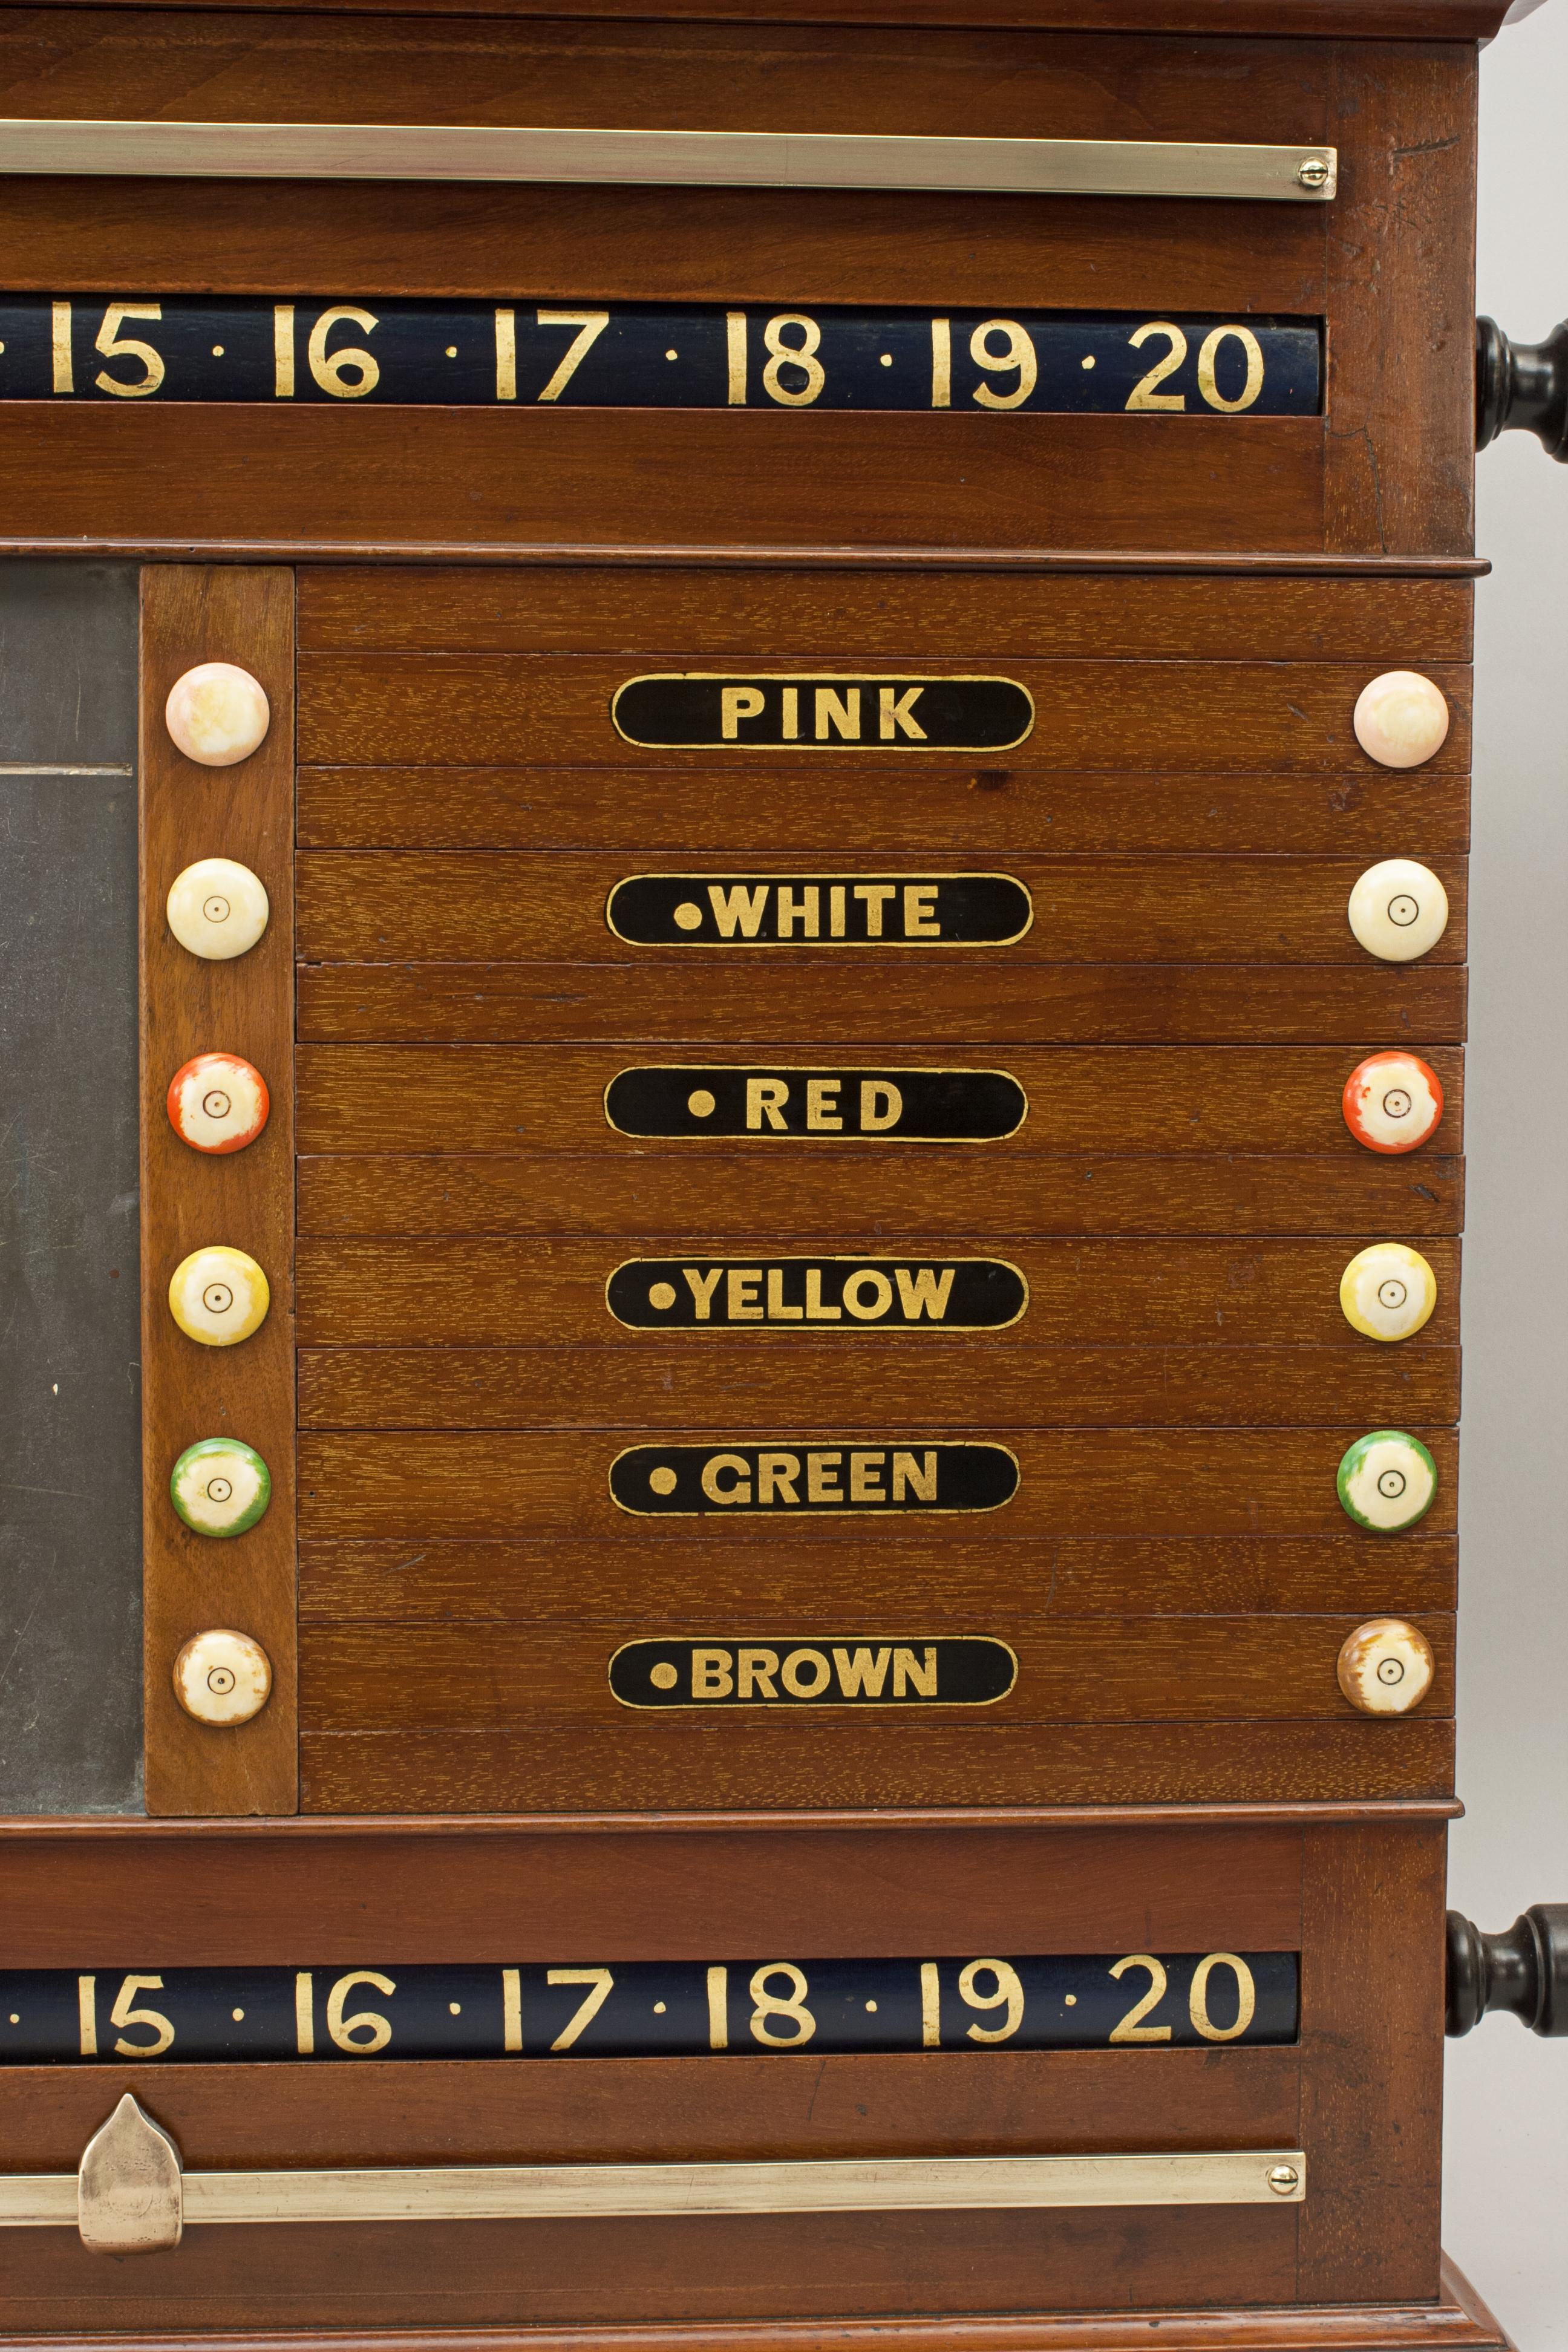 Late 19th Century Thurston Combined Billiards, Snooker and Life Pool Scoreboard